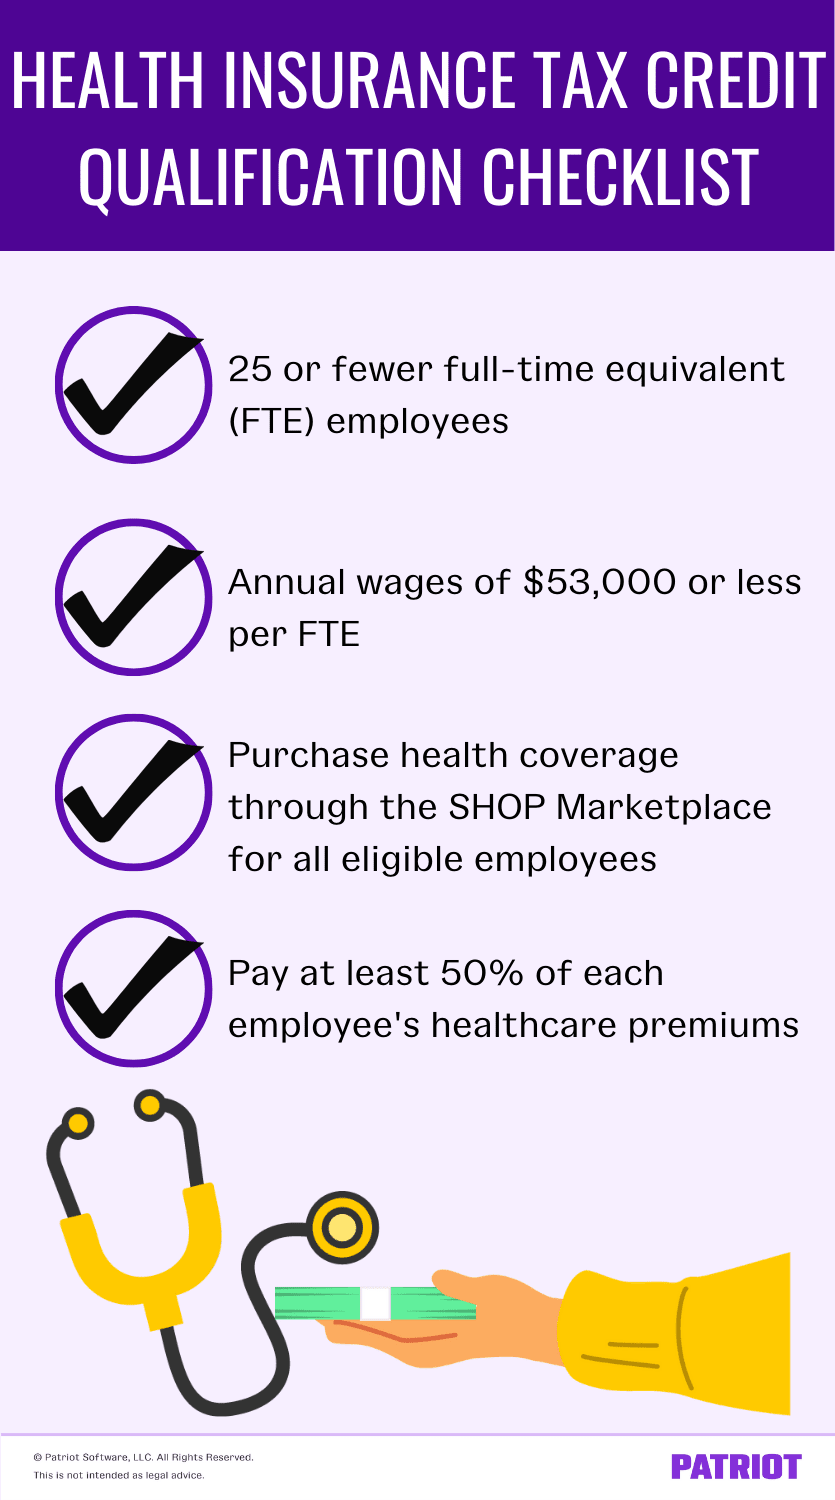 Health insurance tax credit qualification checklist. 25 or fewer full-time equivalent employees. Annual wages of $53,000 or less per full time equivalent employee. Purchase health coverage through the SHOP Marketplace for all eligible employees. Pay at least 50% of each employee's healthcare premiums.